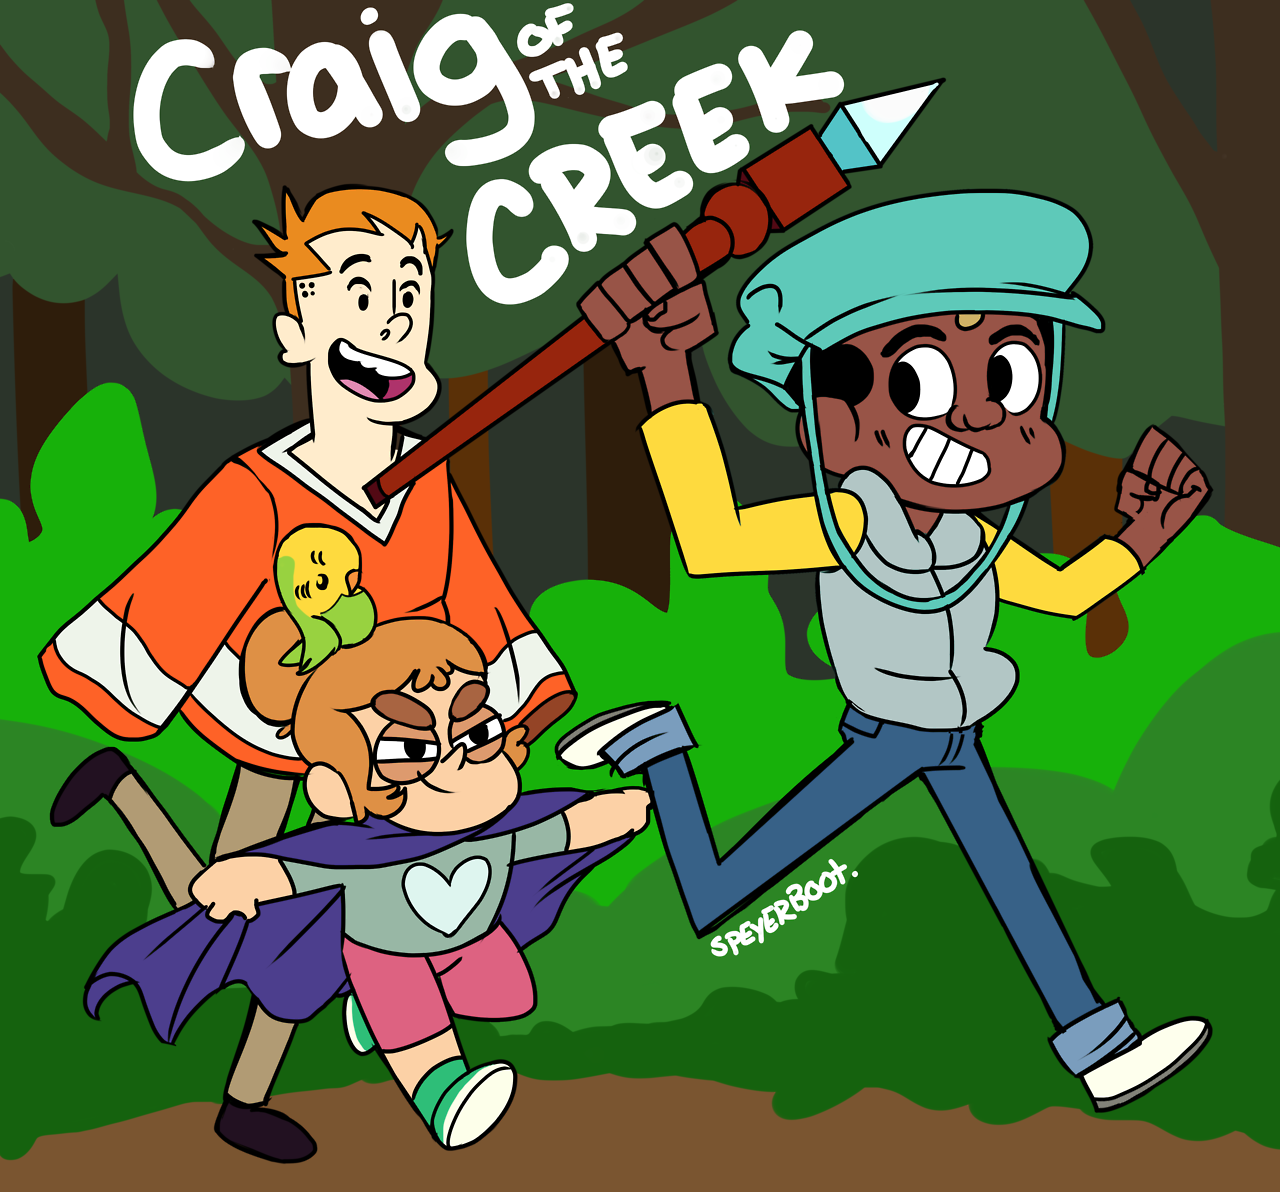 anyone else excited for Craig of the Creek?